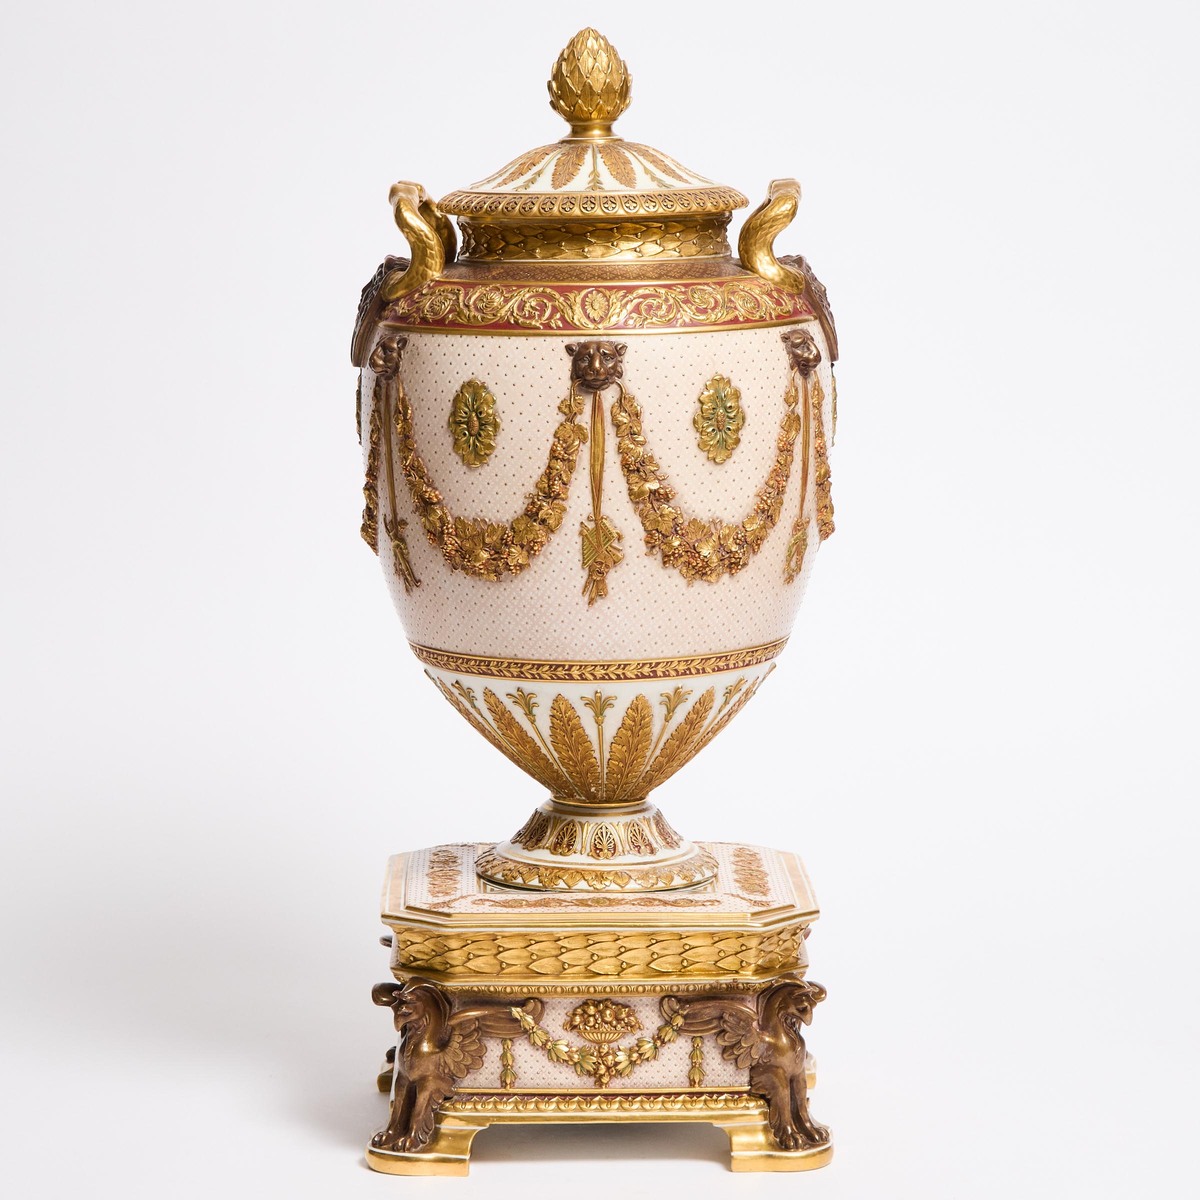 Wedgwood Bronzed and Gilt Victoria Ware Large Covered Urn, c.1900, overall height 37 in — 94 cm - Image 3 of 3